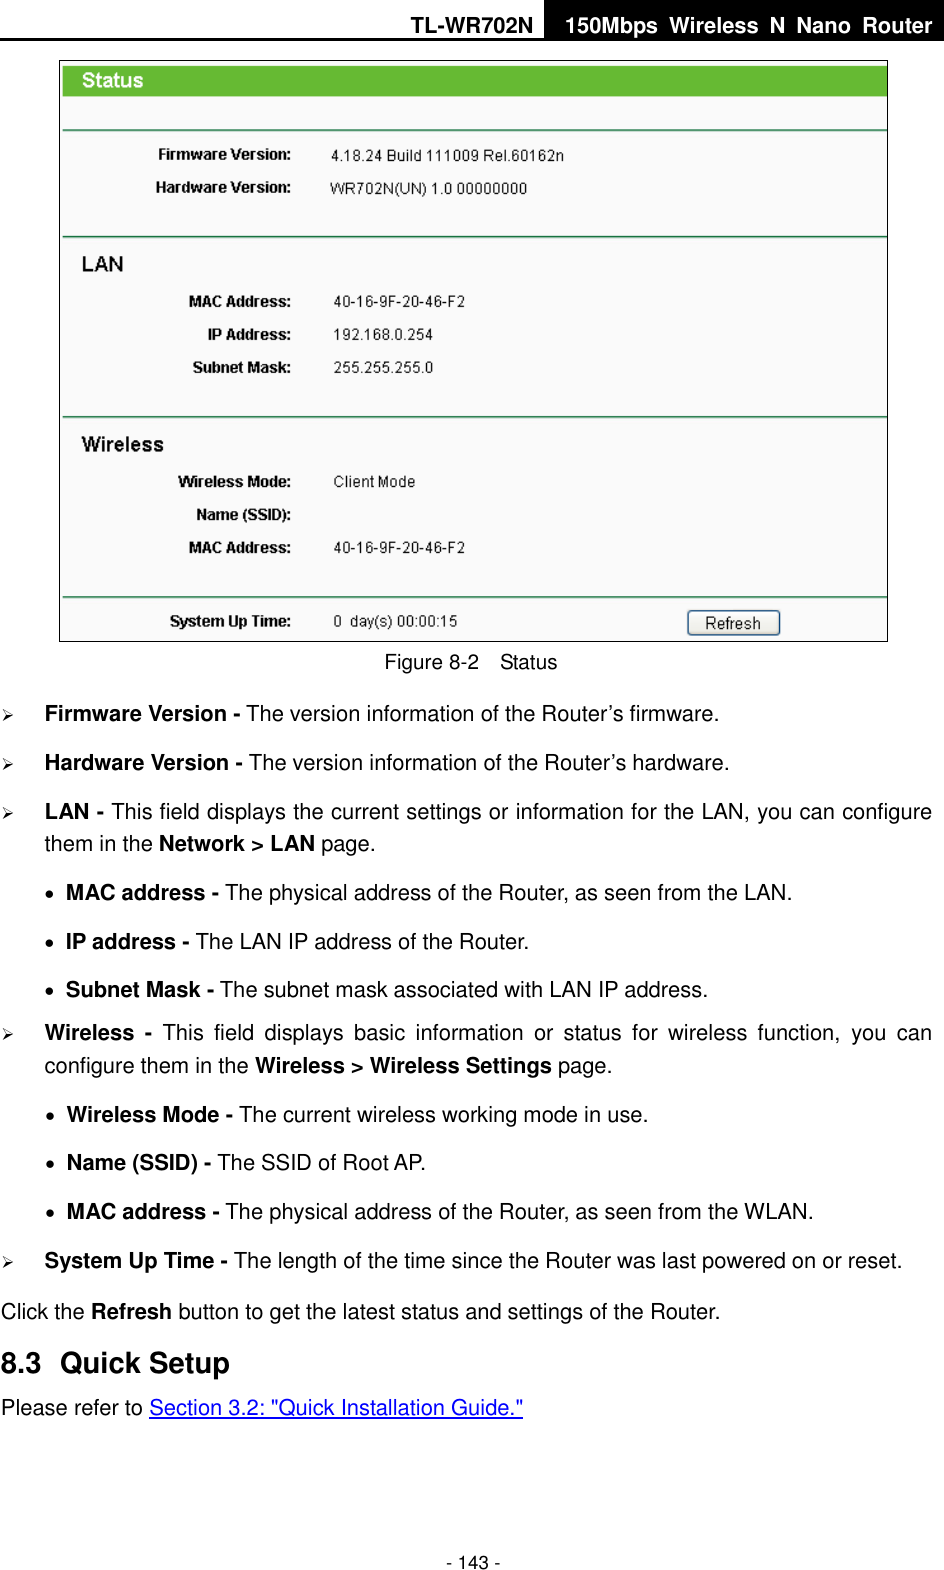 TL-WR702N 150Mbps  Wireless  N  Nano  Router  - 143 -  Figure 8-2  Status  Firmware Version - The version information of the Router’s firmware.  Hardware Version - The version information of the Router’s hardware.  LAN - This field displays the current settings or information for the LAN, you can configure them in the Network &gt; LAN page.    MAC address - The physical address of the Router, as seen from the LAN.  IP address - The LAN IP address of the Router.  Subnet Mask - The subnet mask associated with LAN IP address.  Wireless -  This  field  displays  basic  information  or  status  for  wireless  function,  you  can configure them in the Wireless &gt; Wireless Settings page.    Wireless Mode - The current wireless working mode in use.  Name (SSID) - The SSID of Root AP.  MAC address - The physical address of the Router, as seen from the WLAN.  System Up Time - The length of the time since the Router was last powered on or reset. Click the Refresh button to get the latest status and settings of the Router. 8.3  Quick Setup Please refer to Section 3.2: &quot;Quick Installation Guide.&quot; 